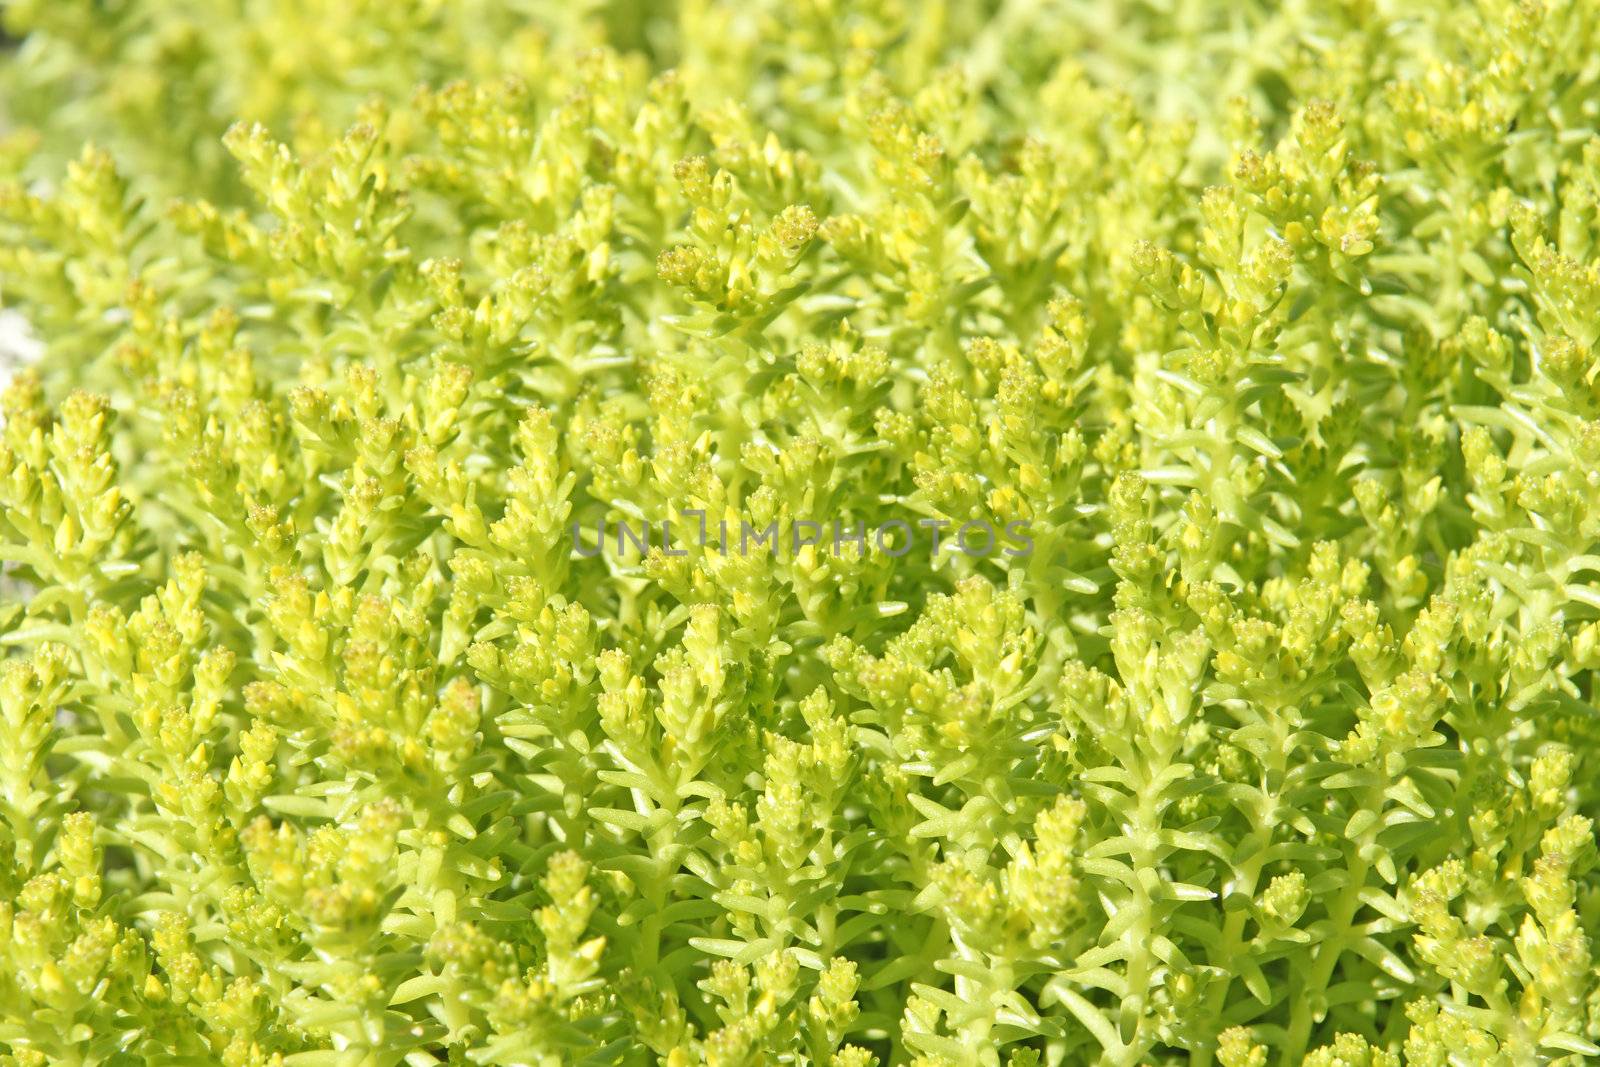 Low key close-up of  little green plants with yellow flowers forming a thick dense mat, interesting textures.